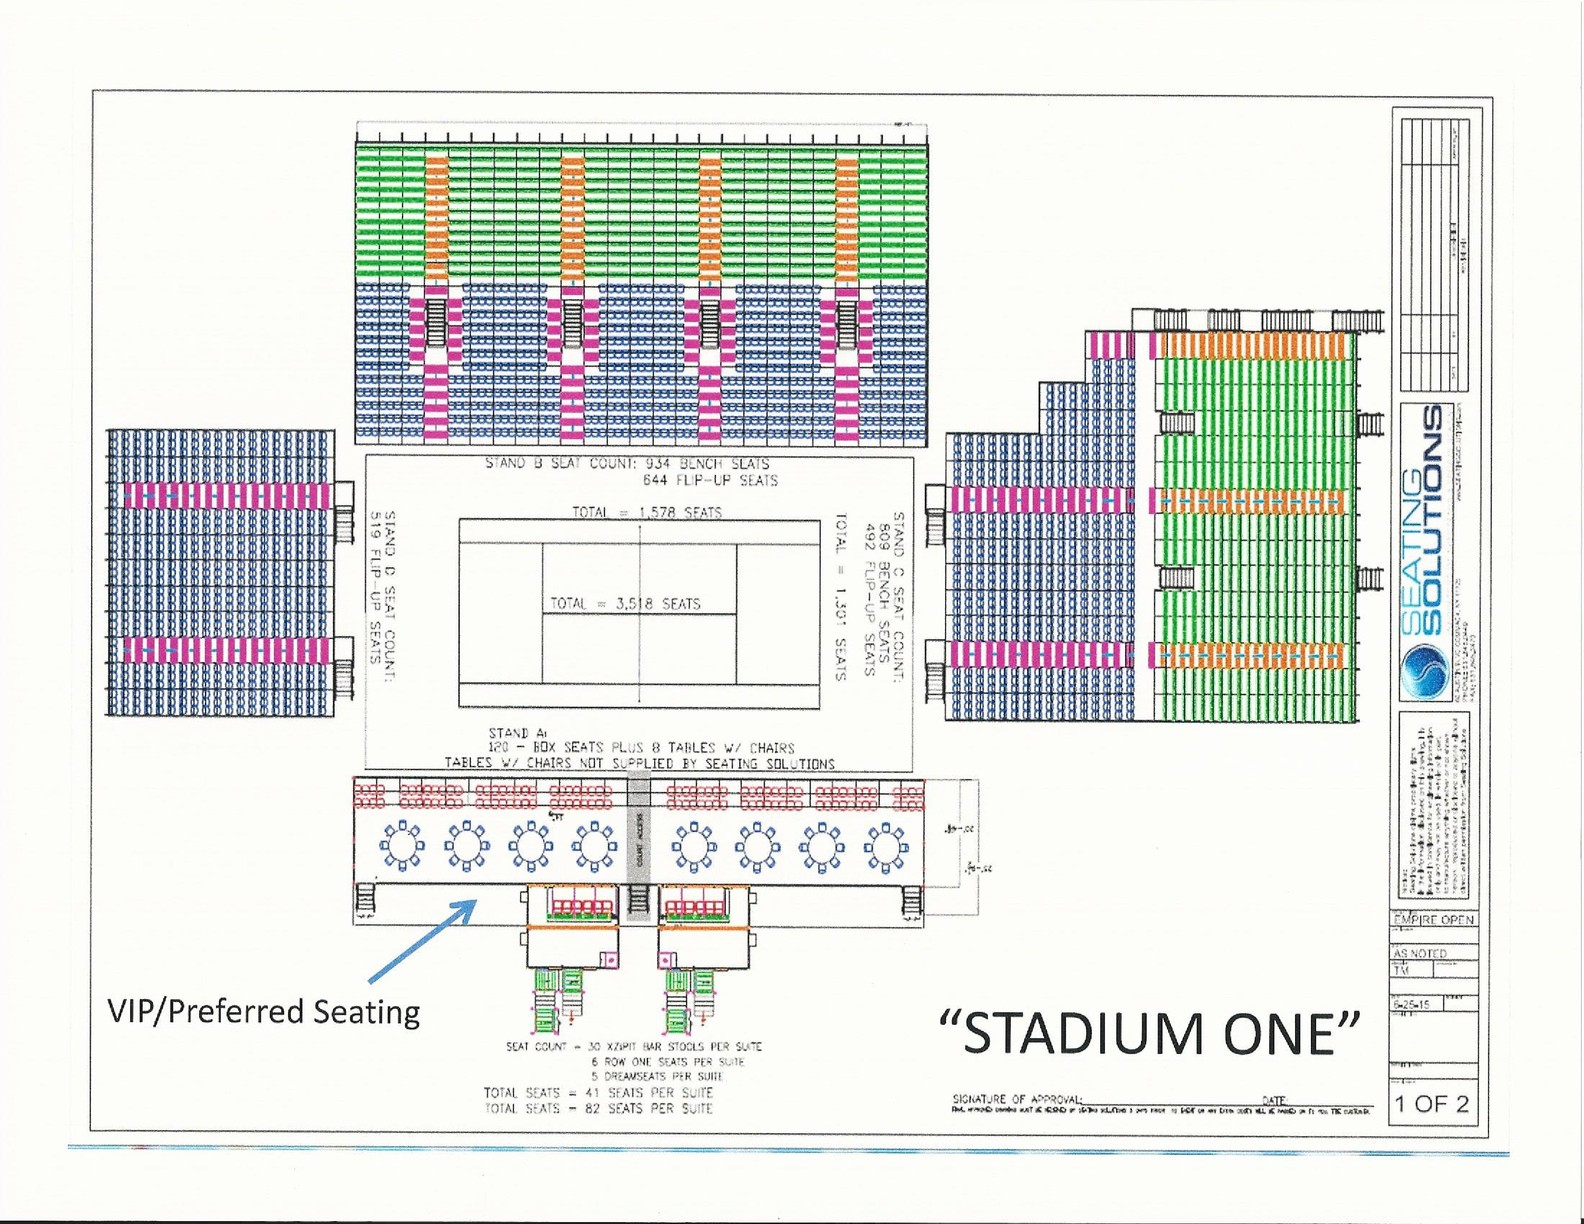 The WTA will build a temporary stadium at the Hempstead Lake State Park tennis courts that can seat more than 3,500 spectators. There will also be a 1,200-seat second stadium. (Courtesy WTA)